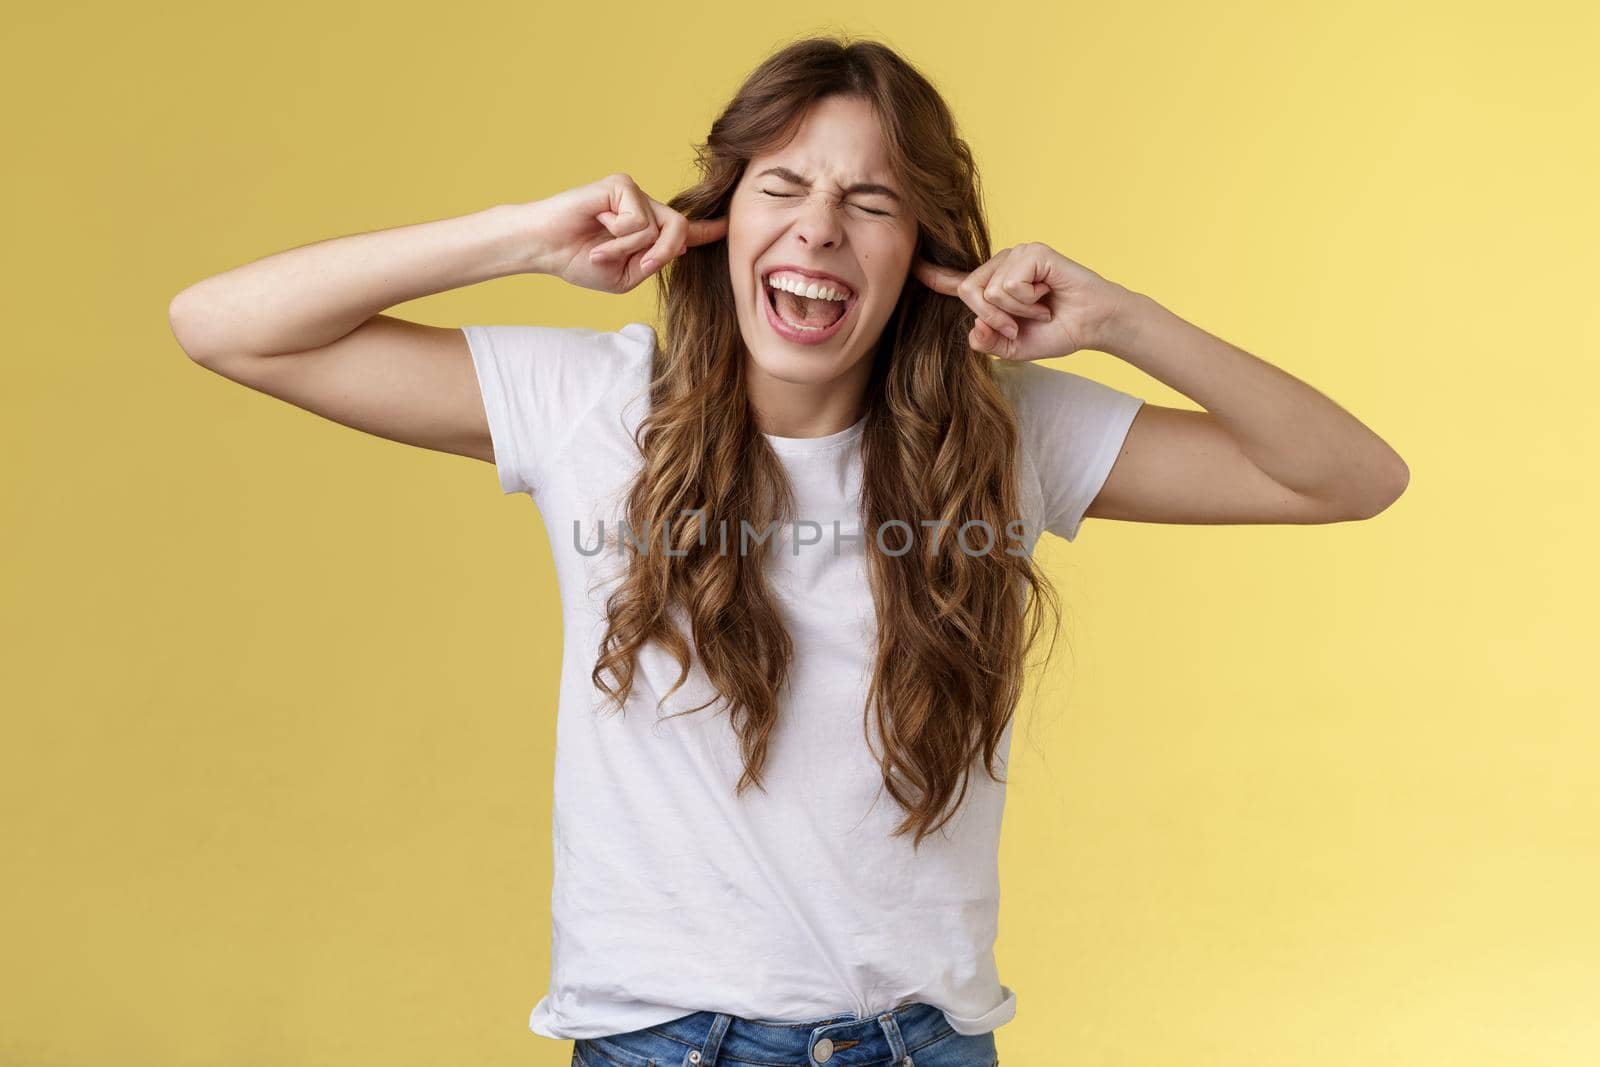 Girl yelling annoyed demand stop playing guitar. Bothered irritated woman close eyes screaming disappointed plug index fingers ear holes disgusted loud terrible noise music stand yellow background.